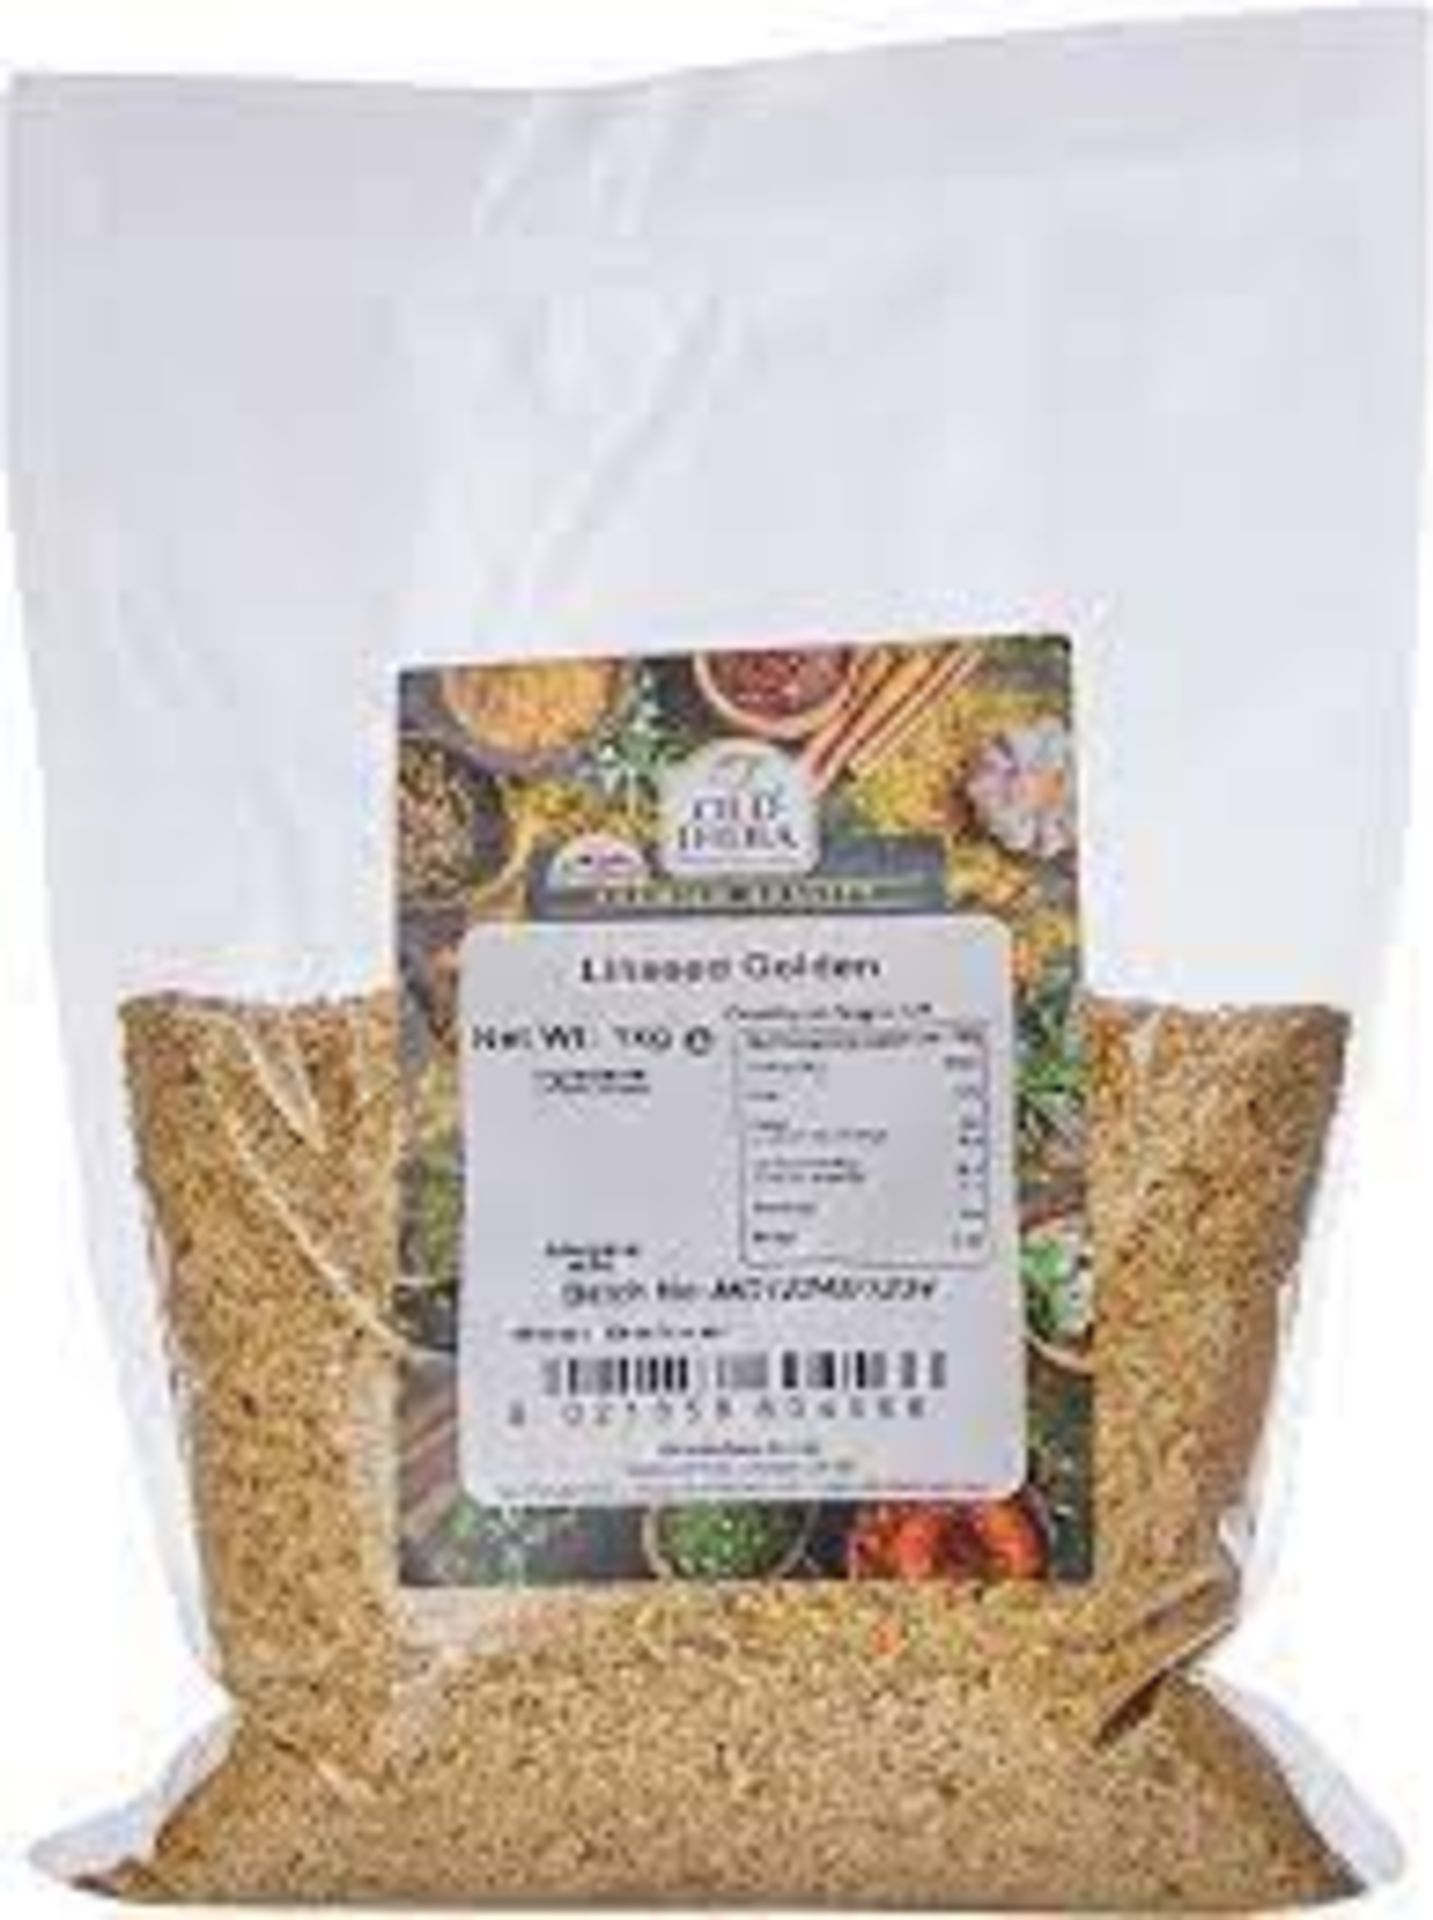 RRP £1395(Approx Count 224)(F6) 50 x Old India Linseed Golden Crushed 50g 28 x Morrisons Italian